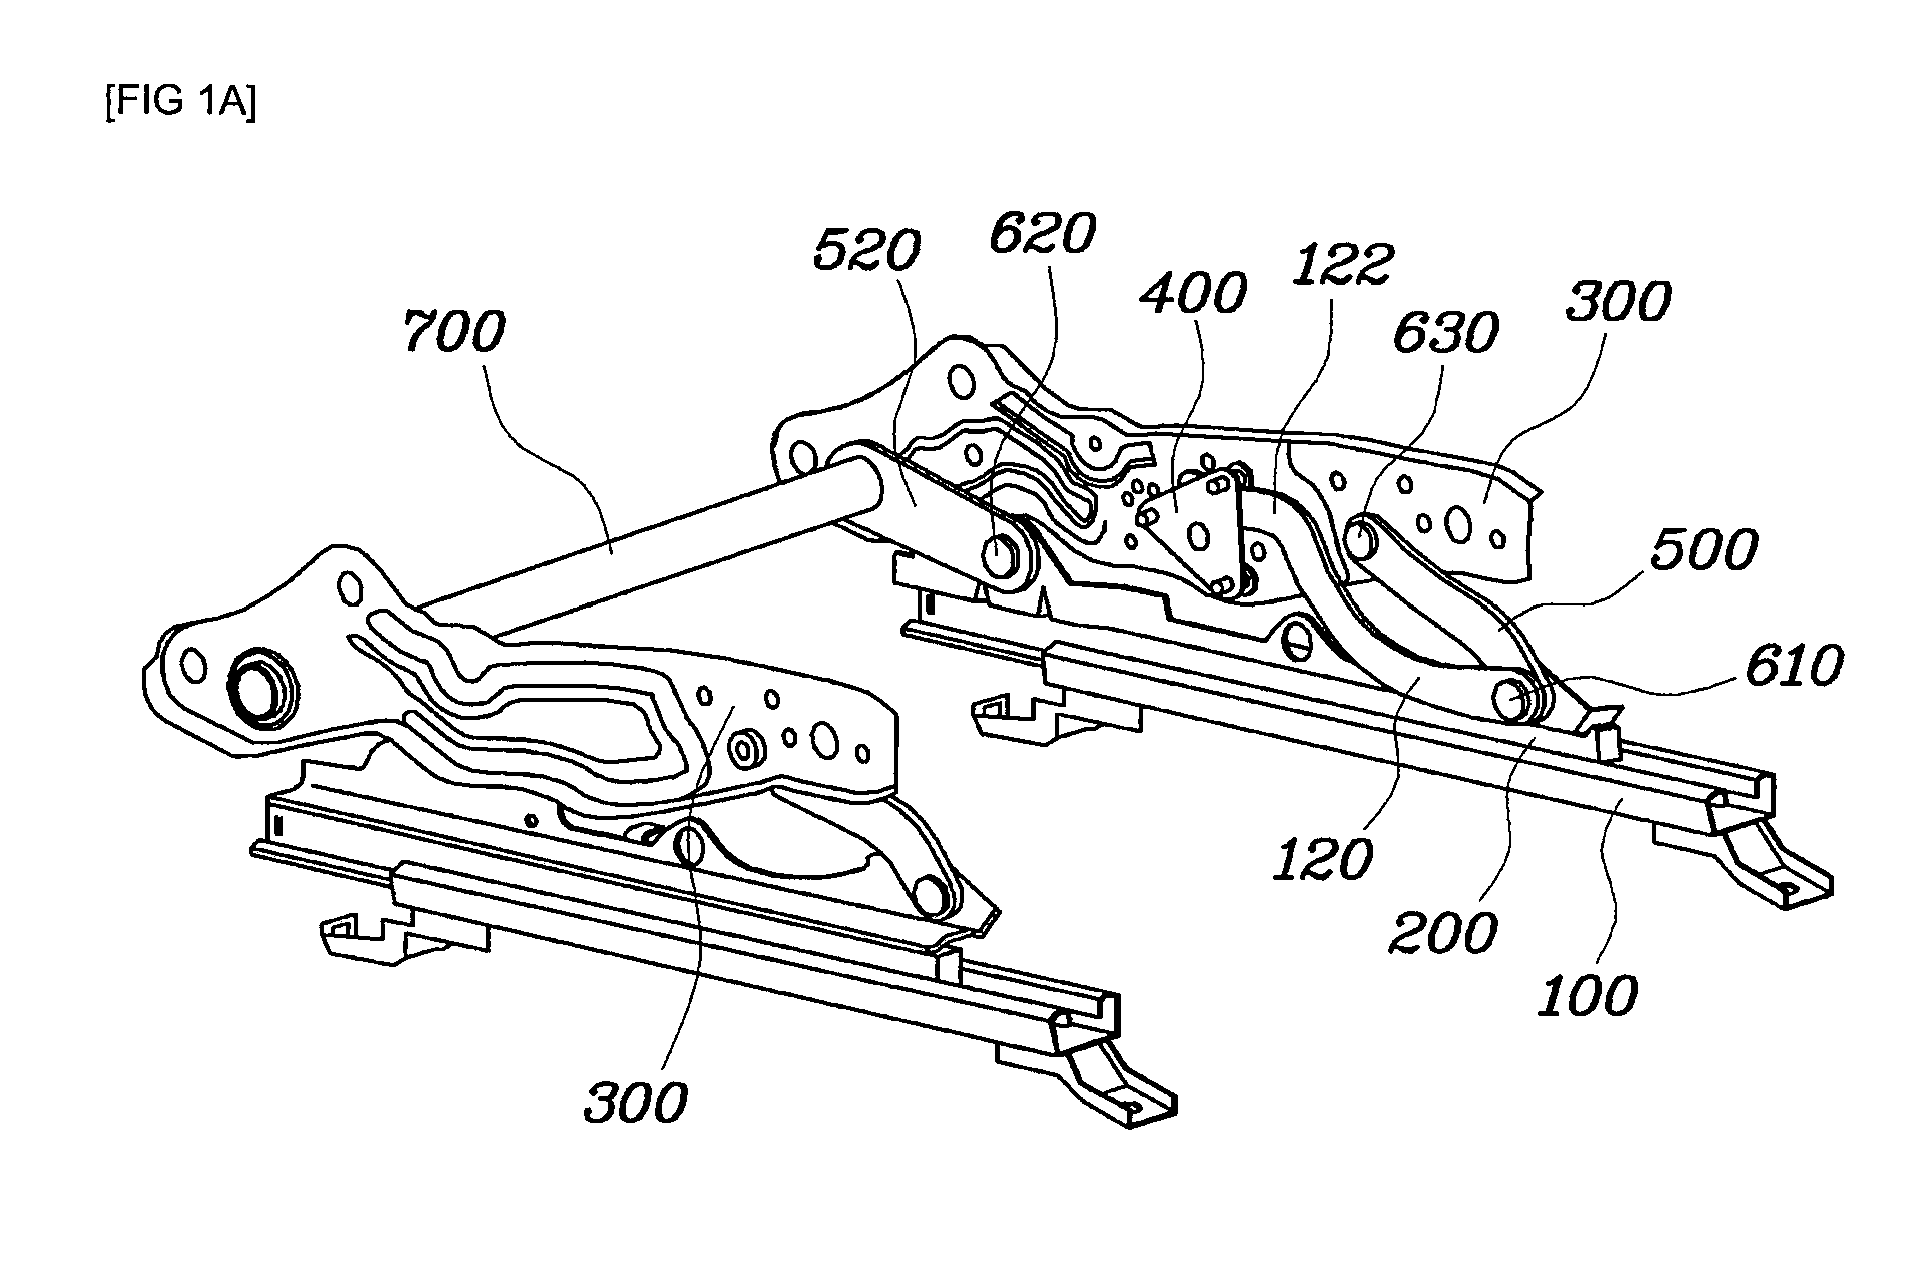 Height adjusting apparatus for vehicle seats